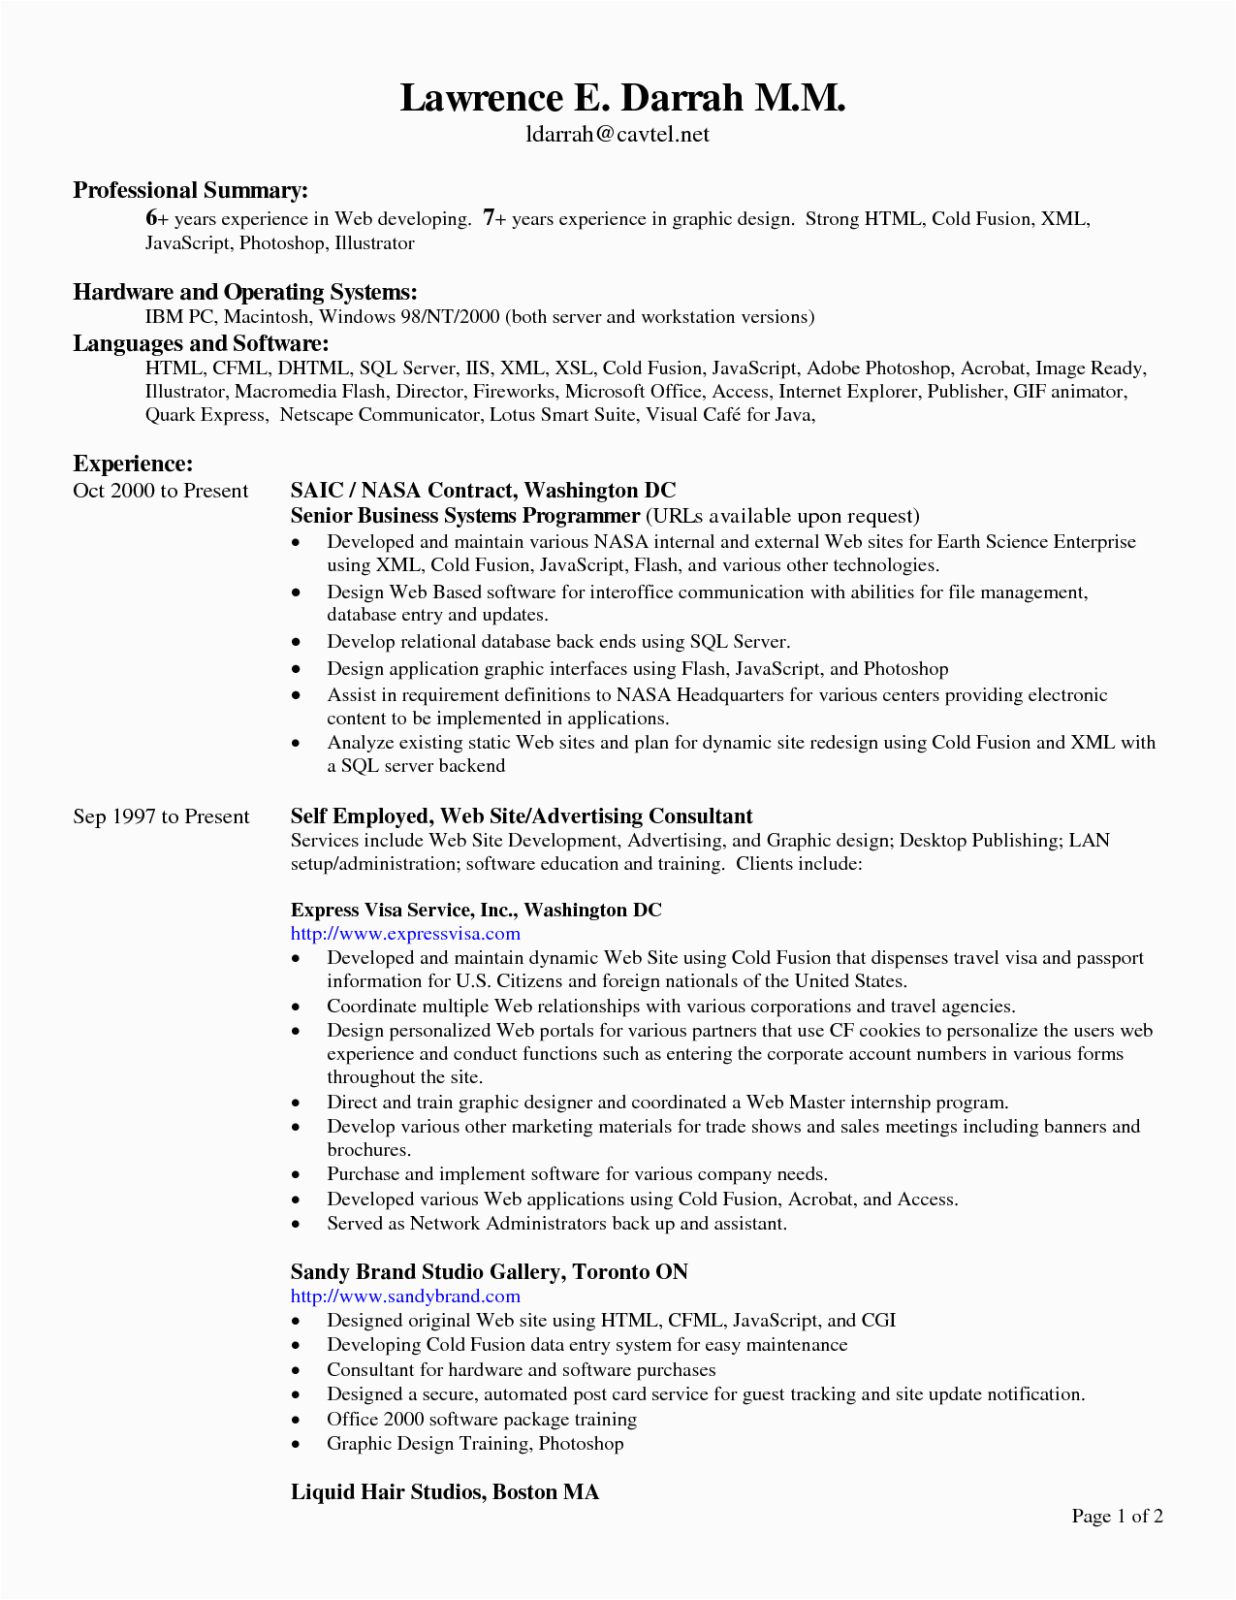 Sample Resume with Header and Footer 13 Primary Resume Headings 13 Basic Resume Headings